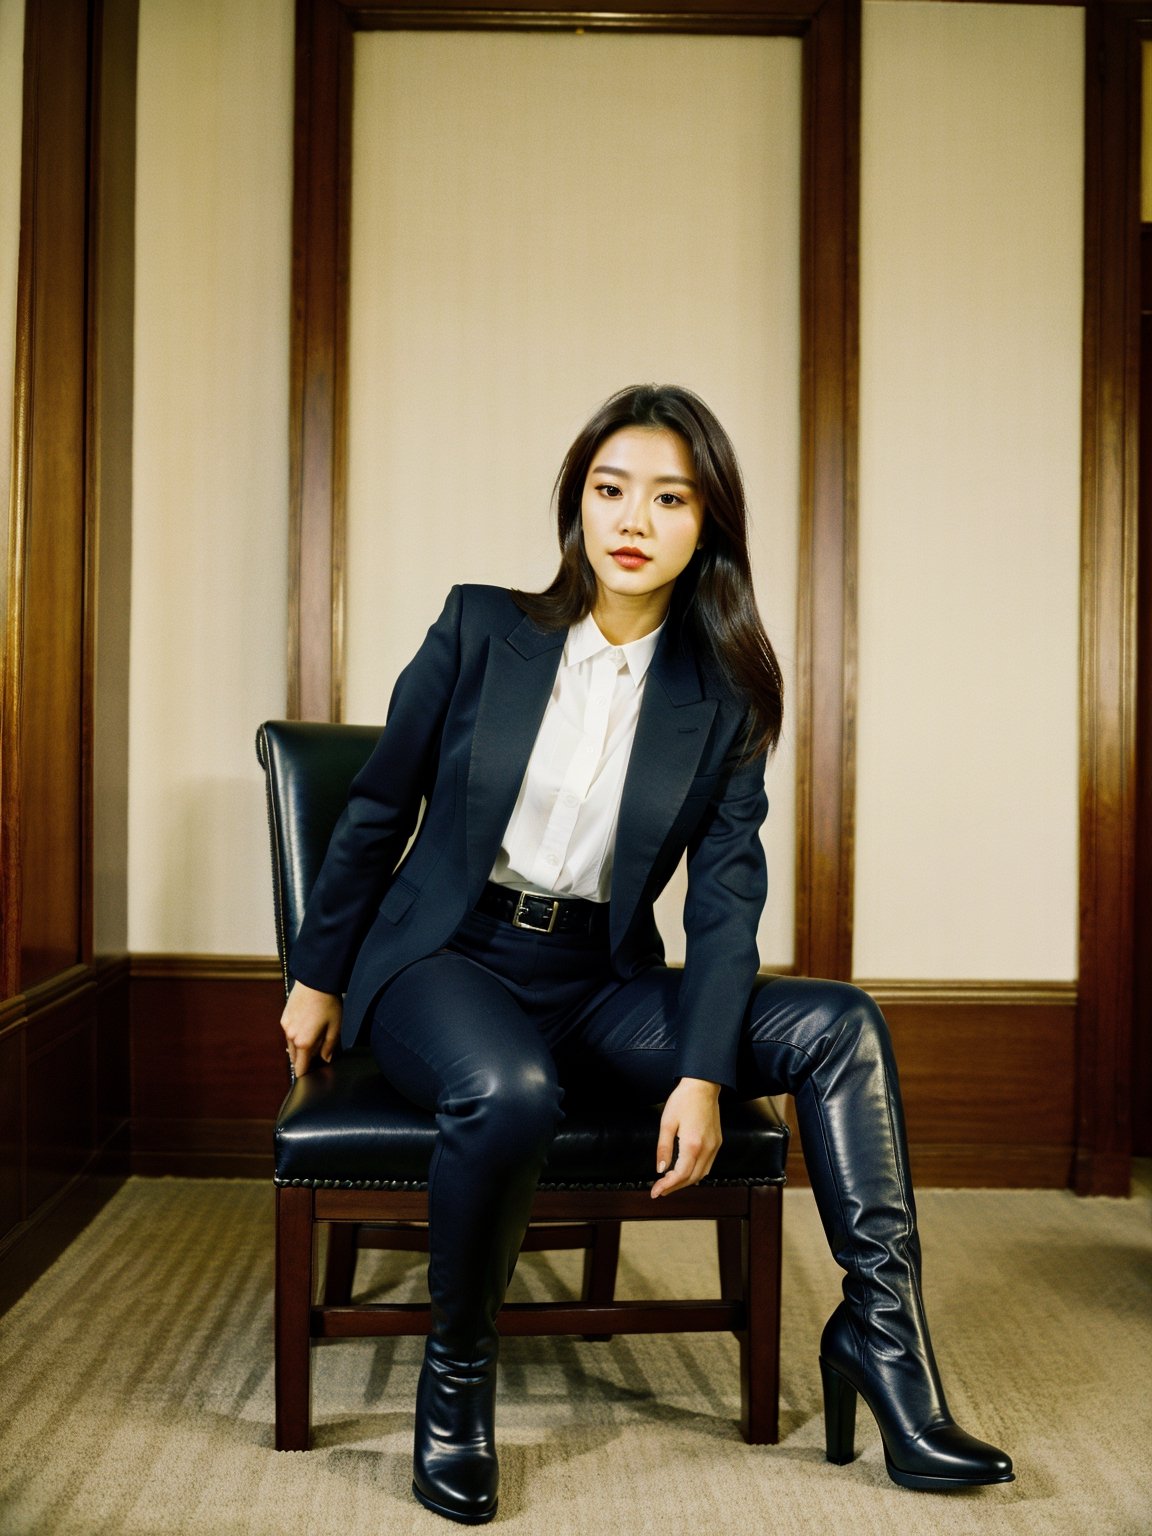 (full body:1.4), 8k, RAW photo, best quality, ((best quality:1.4)), ((masterpiece:1.4)), ((detailed:1.3)), realistic, photo-realistic, woman sitting on a chair in a room with a table and chairs, high boots, girl in a suit, business attire, photoshoot, korean women's fashion model, sexy style, knee-high boots, sexy, kpop idol makeup, business woman, cover shot, office clothes, high fashion classy, tight navy-blue leather outfit,FilmGirl